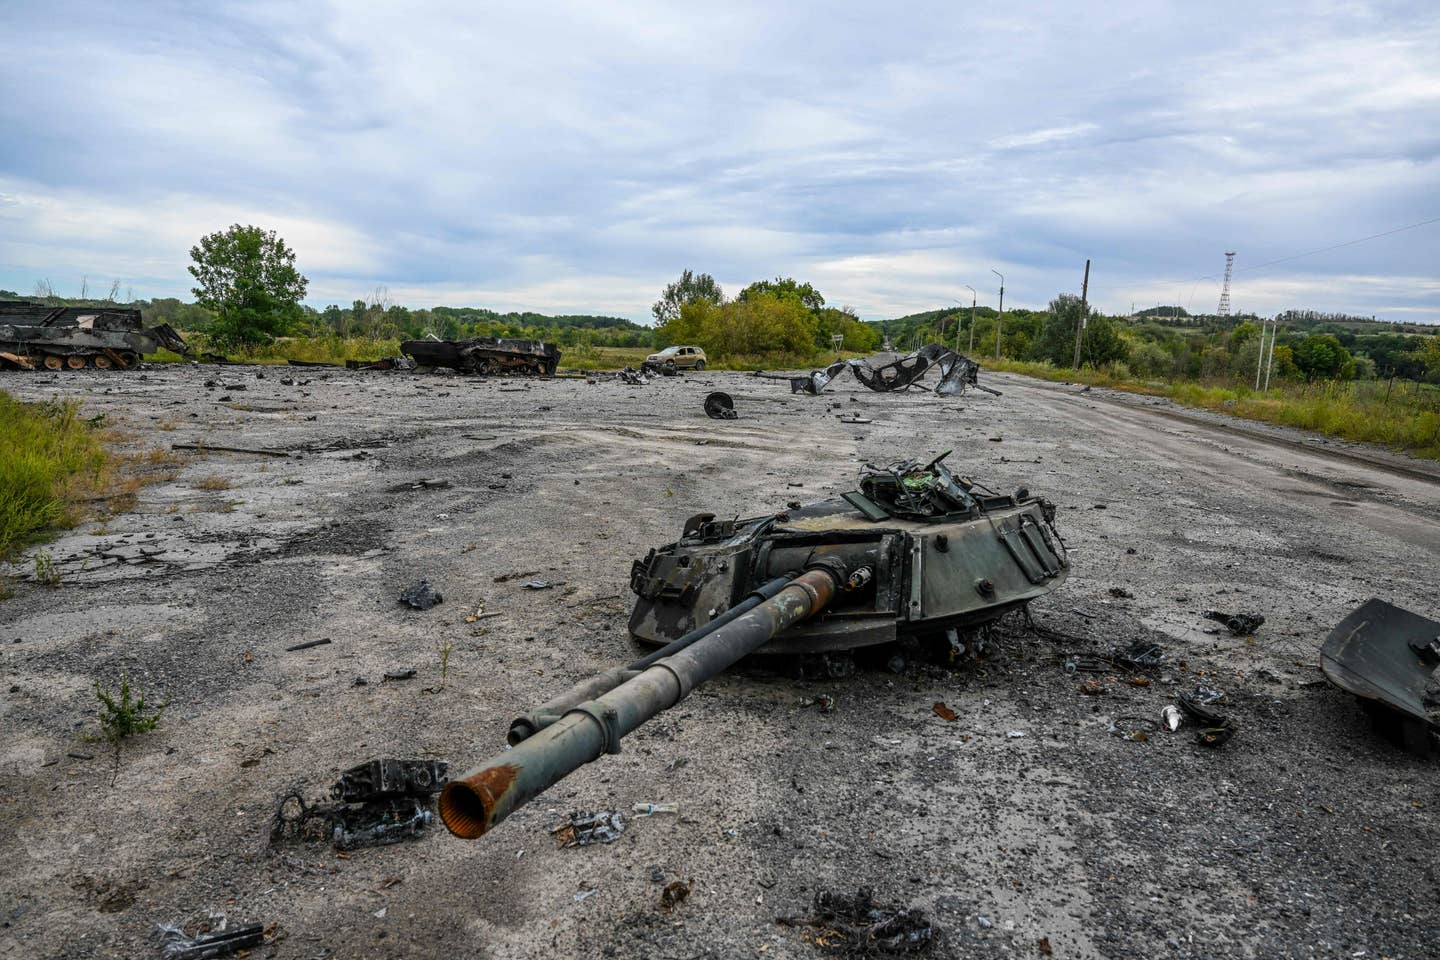 The turret of a Russian tank destroyed during Ukraine's Kharkiv counteroffensive. (Photo by Juan BARRETO / AFP) (Photo by JUAN BARRETO/AFP via Getty Images)